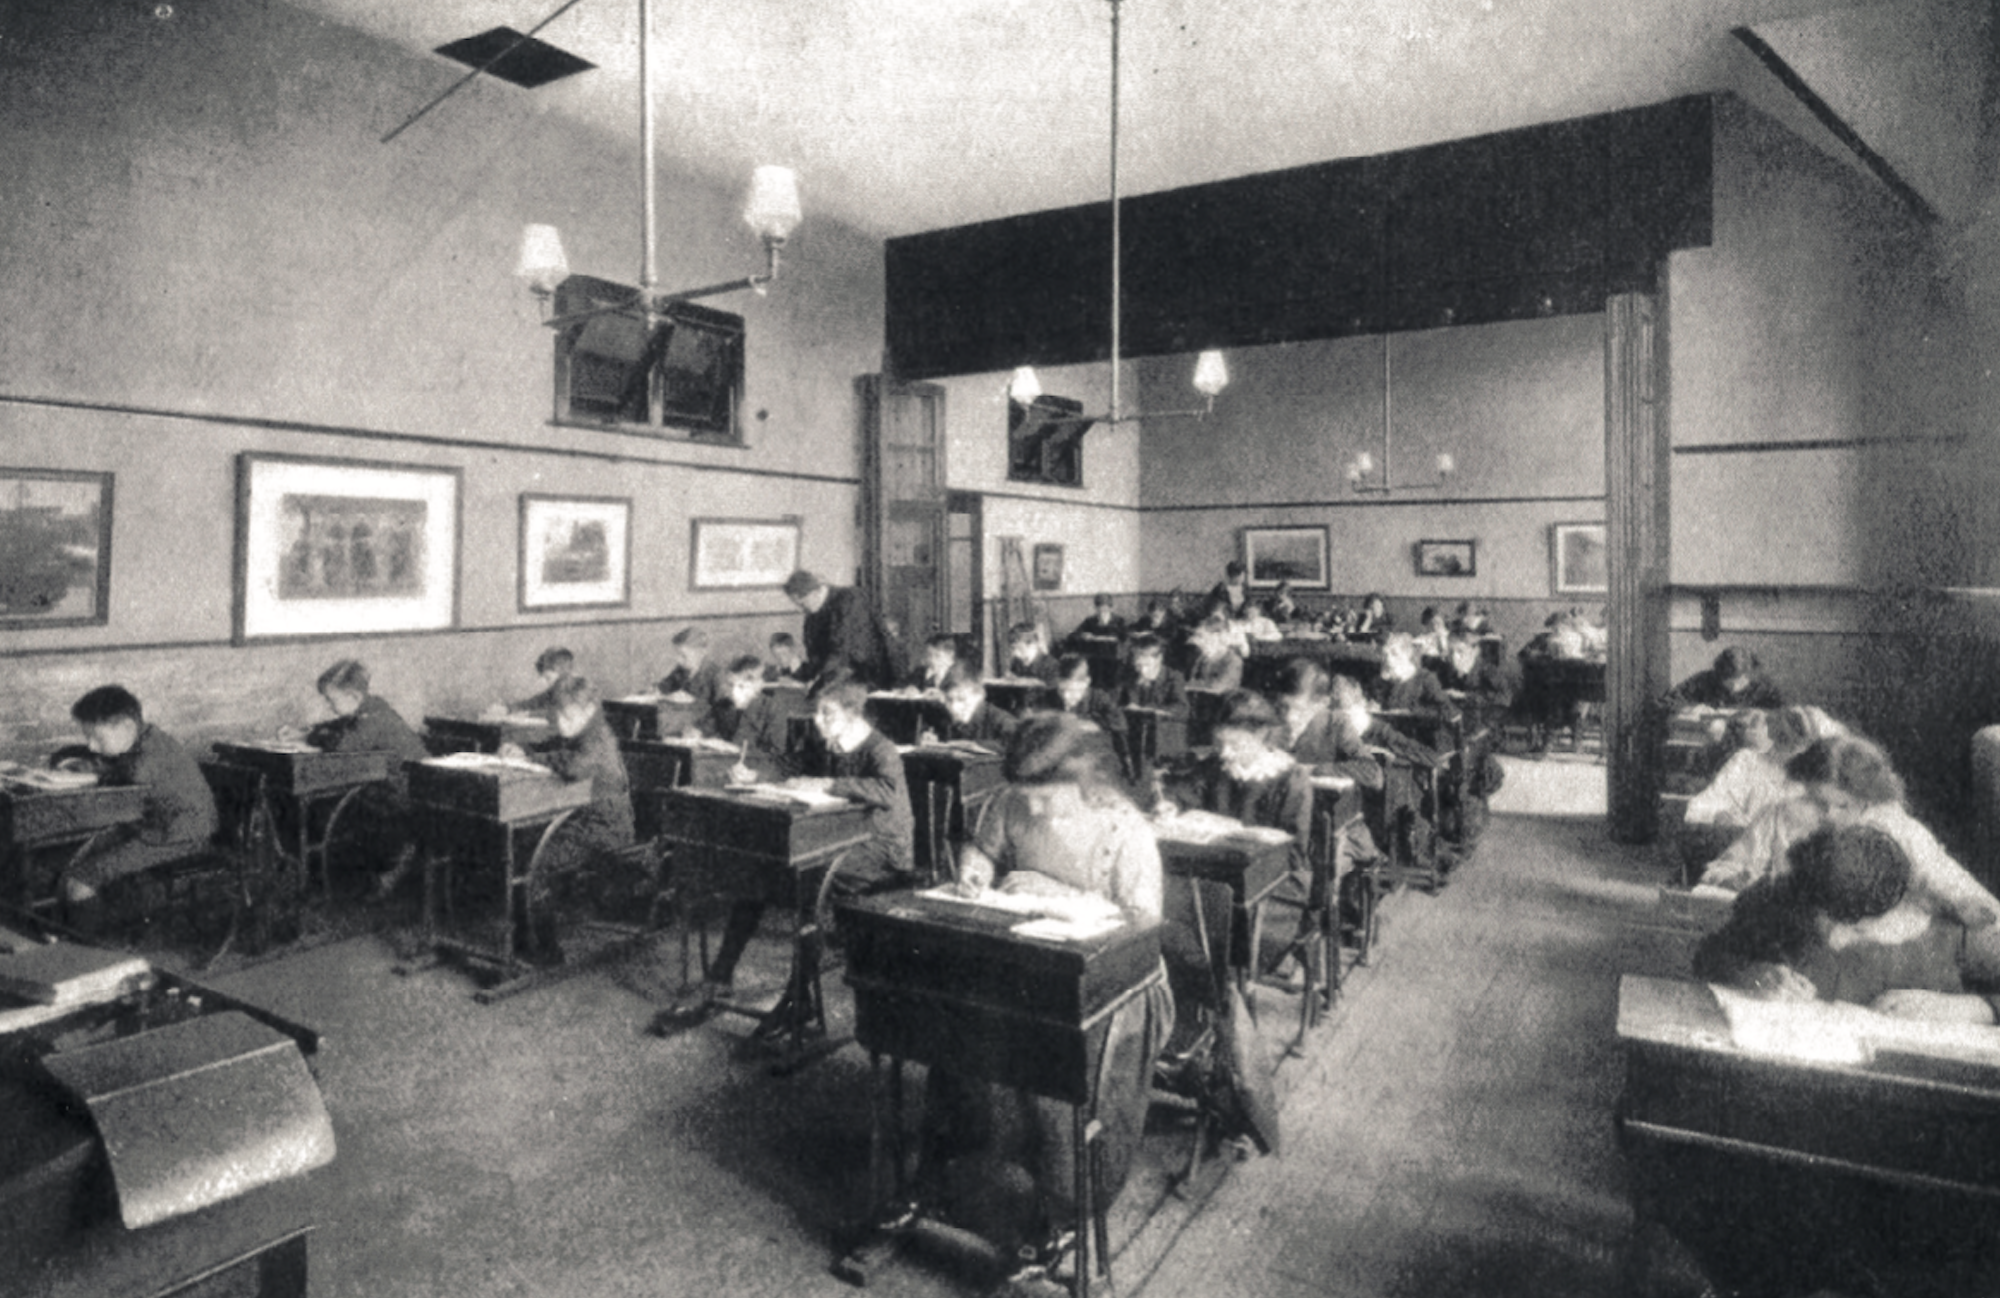 A classroom in the 1905 building, showing gas lighting and a retractable partition